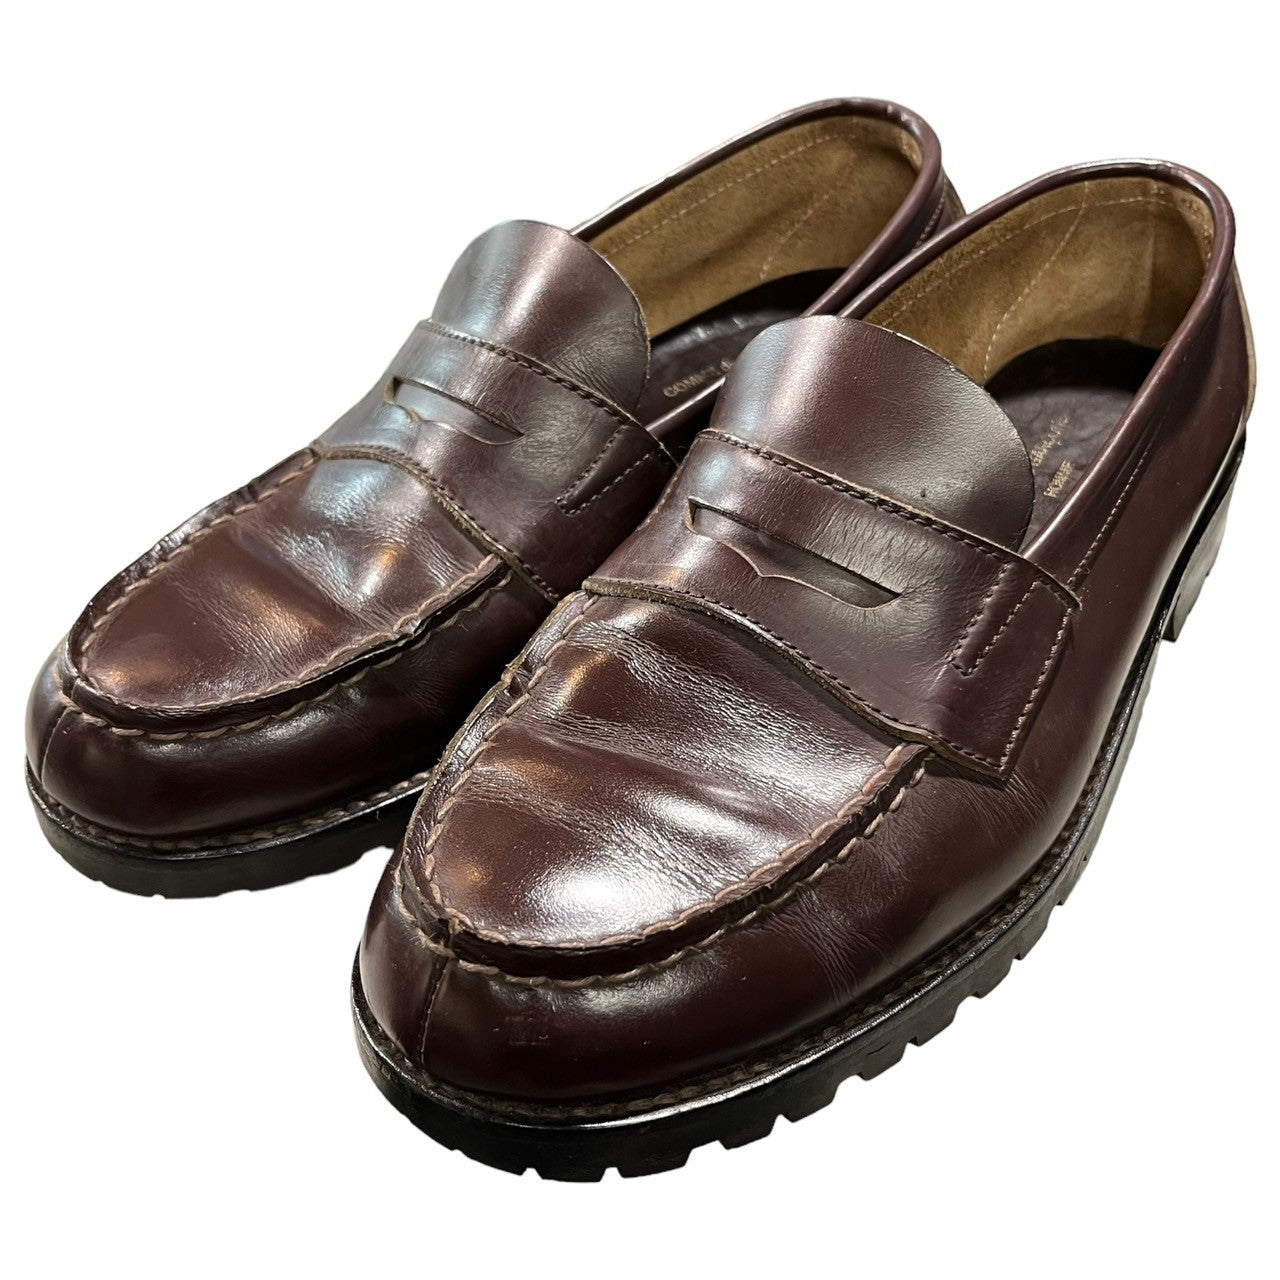 COMME des GARCONS HOMME(コムデギャルソンオム) 00s command sole  loafers/コマンドソールローファー/革靴 SIZE表記消え(推定24.5cm程度) ブラウン 日本製